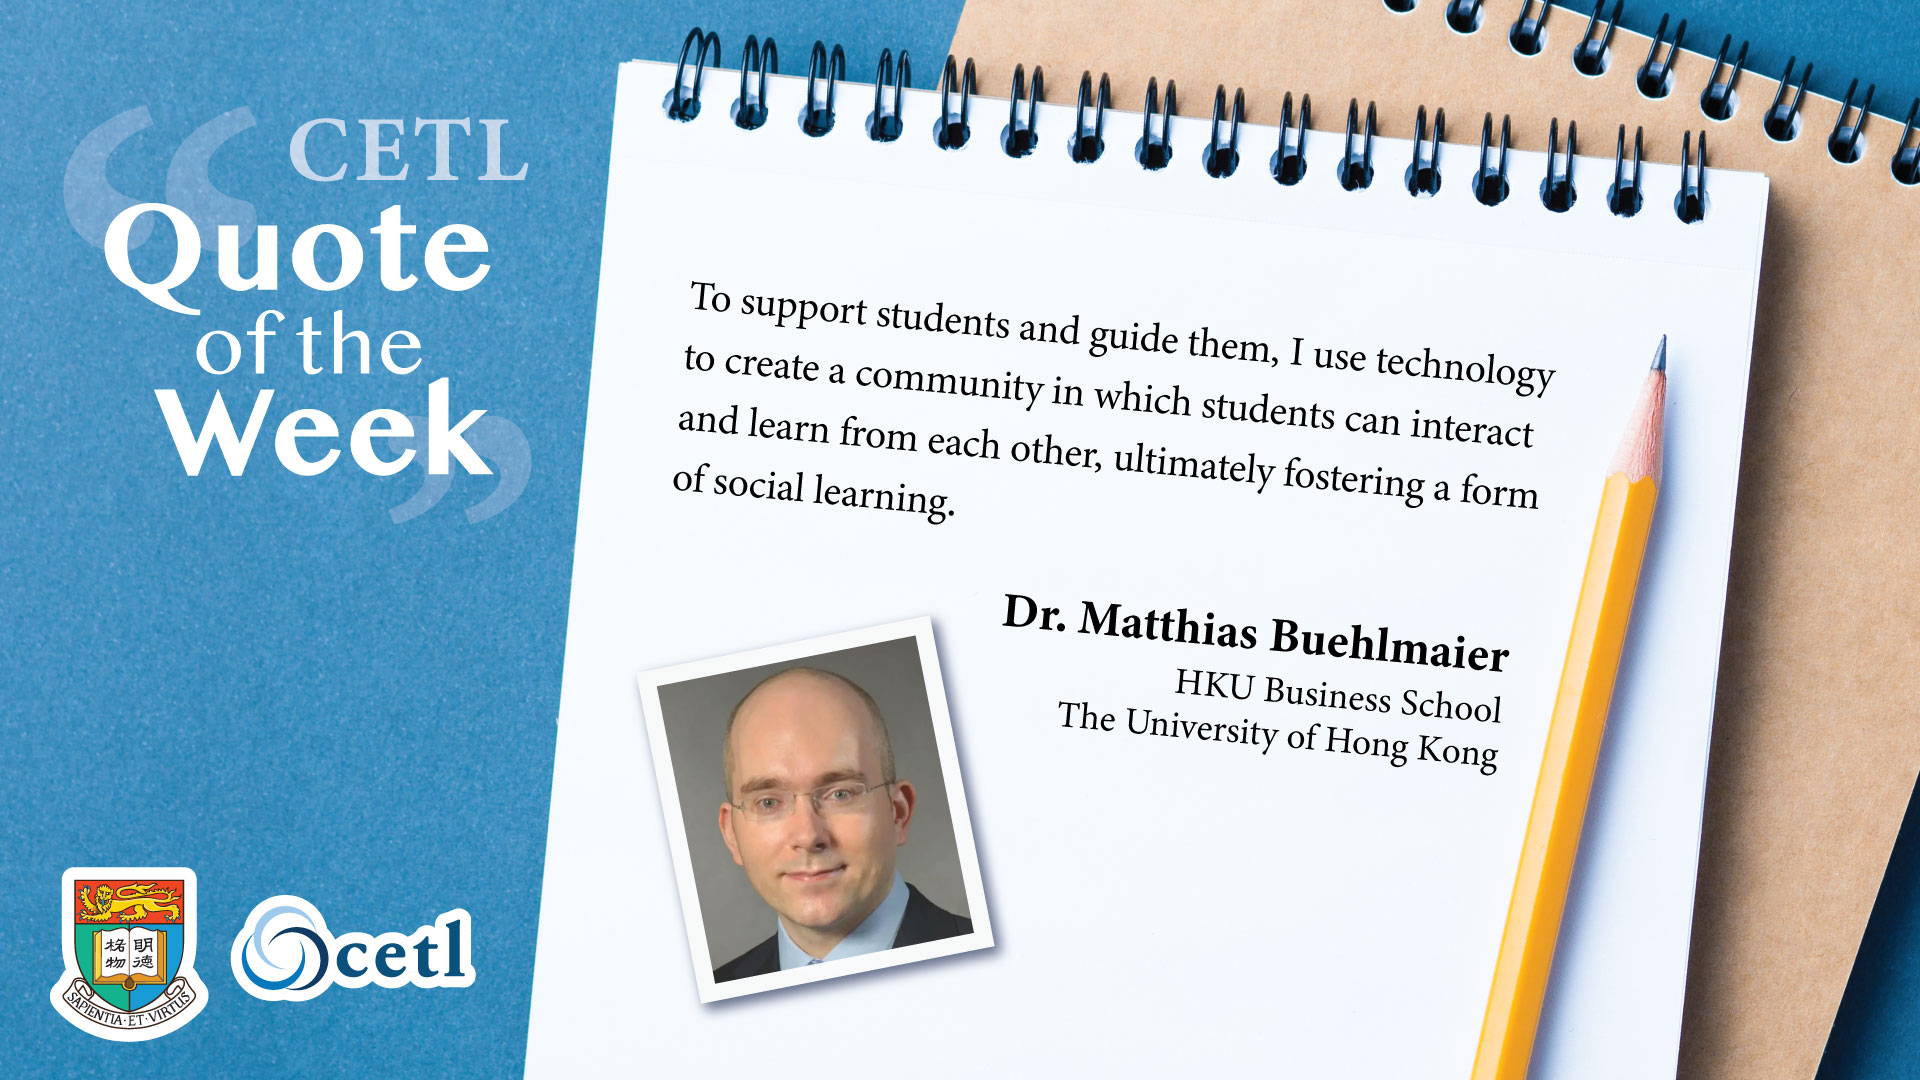 Dr. Matthias Buehlmaier - To support students and guide them, I use technology to create a community in which students can interact and learn from each other, ultimately fostering a form of social learning.